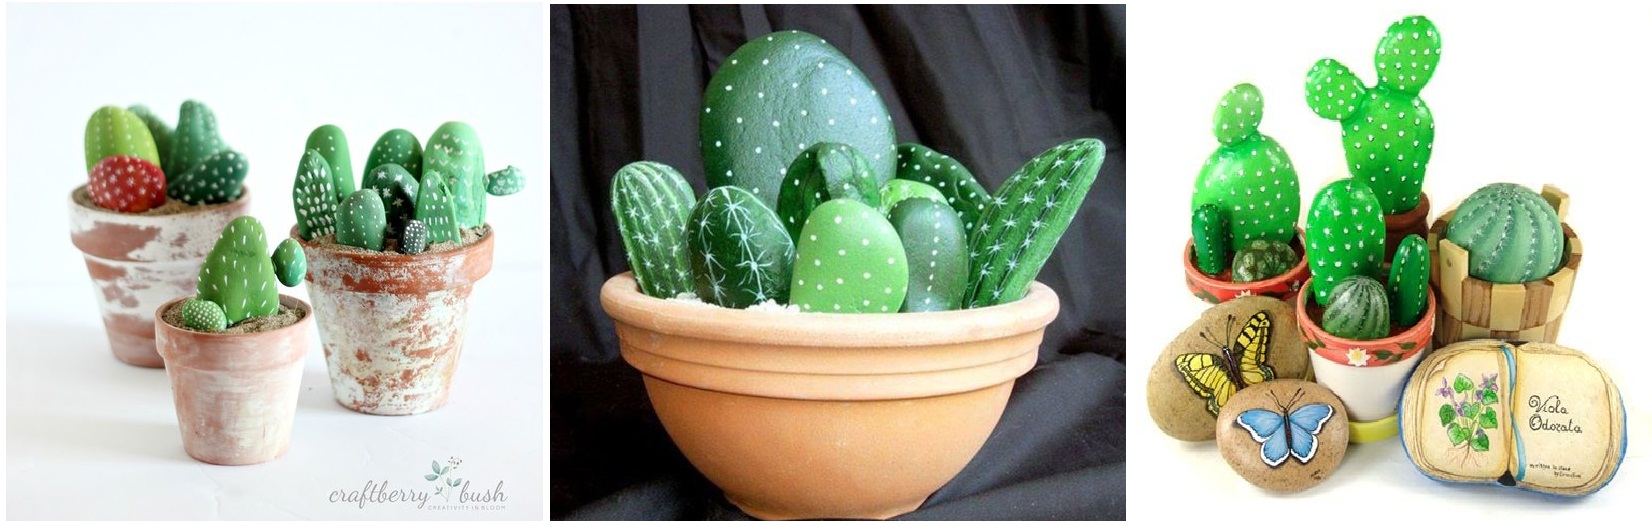 Cactus from stones | My desired home